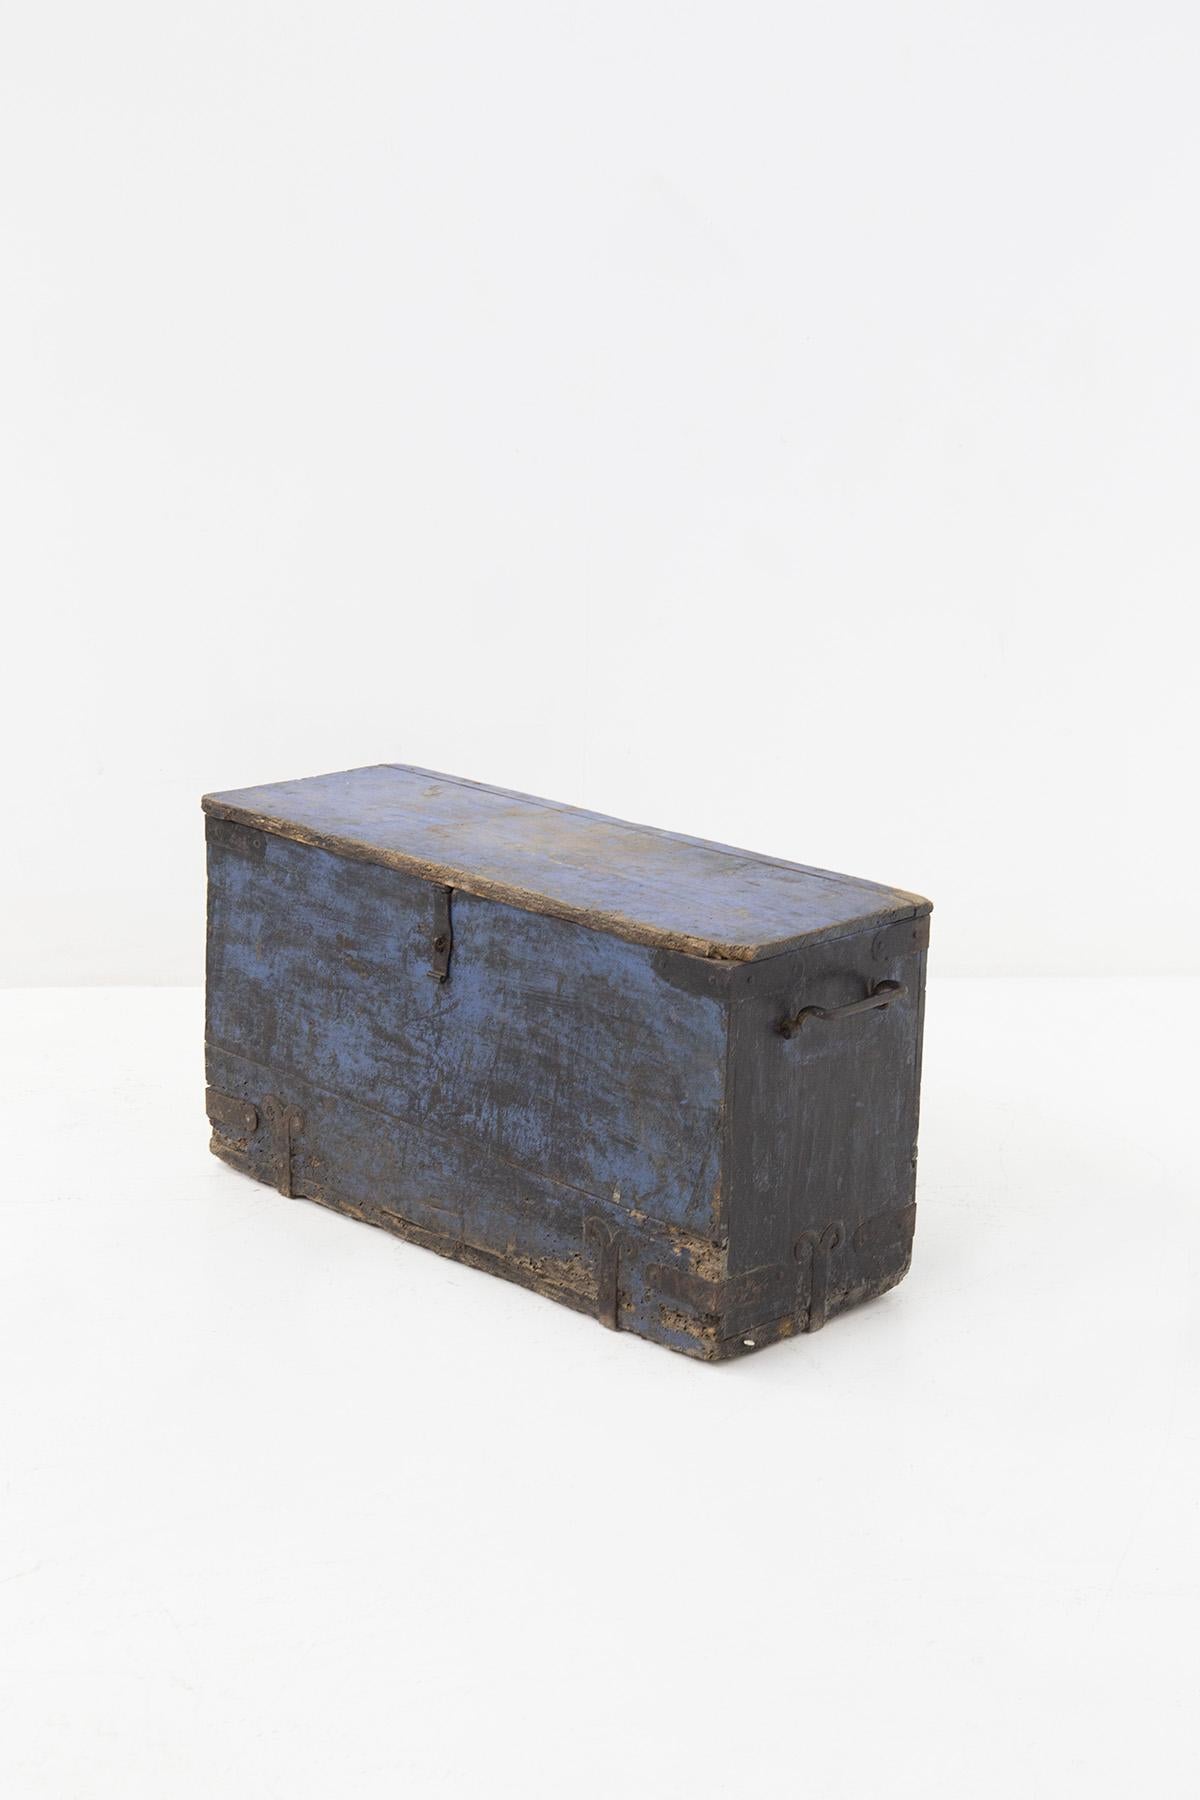 Fabulous painted wooden decorative trunk box from the Rustic Chic period of the early 1920s, made in Italy. The trunk can also be placed in the Fané style.
The box are small in size and are useful for organizing and arranging objects.
They are